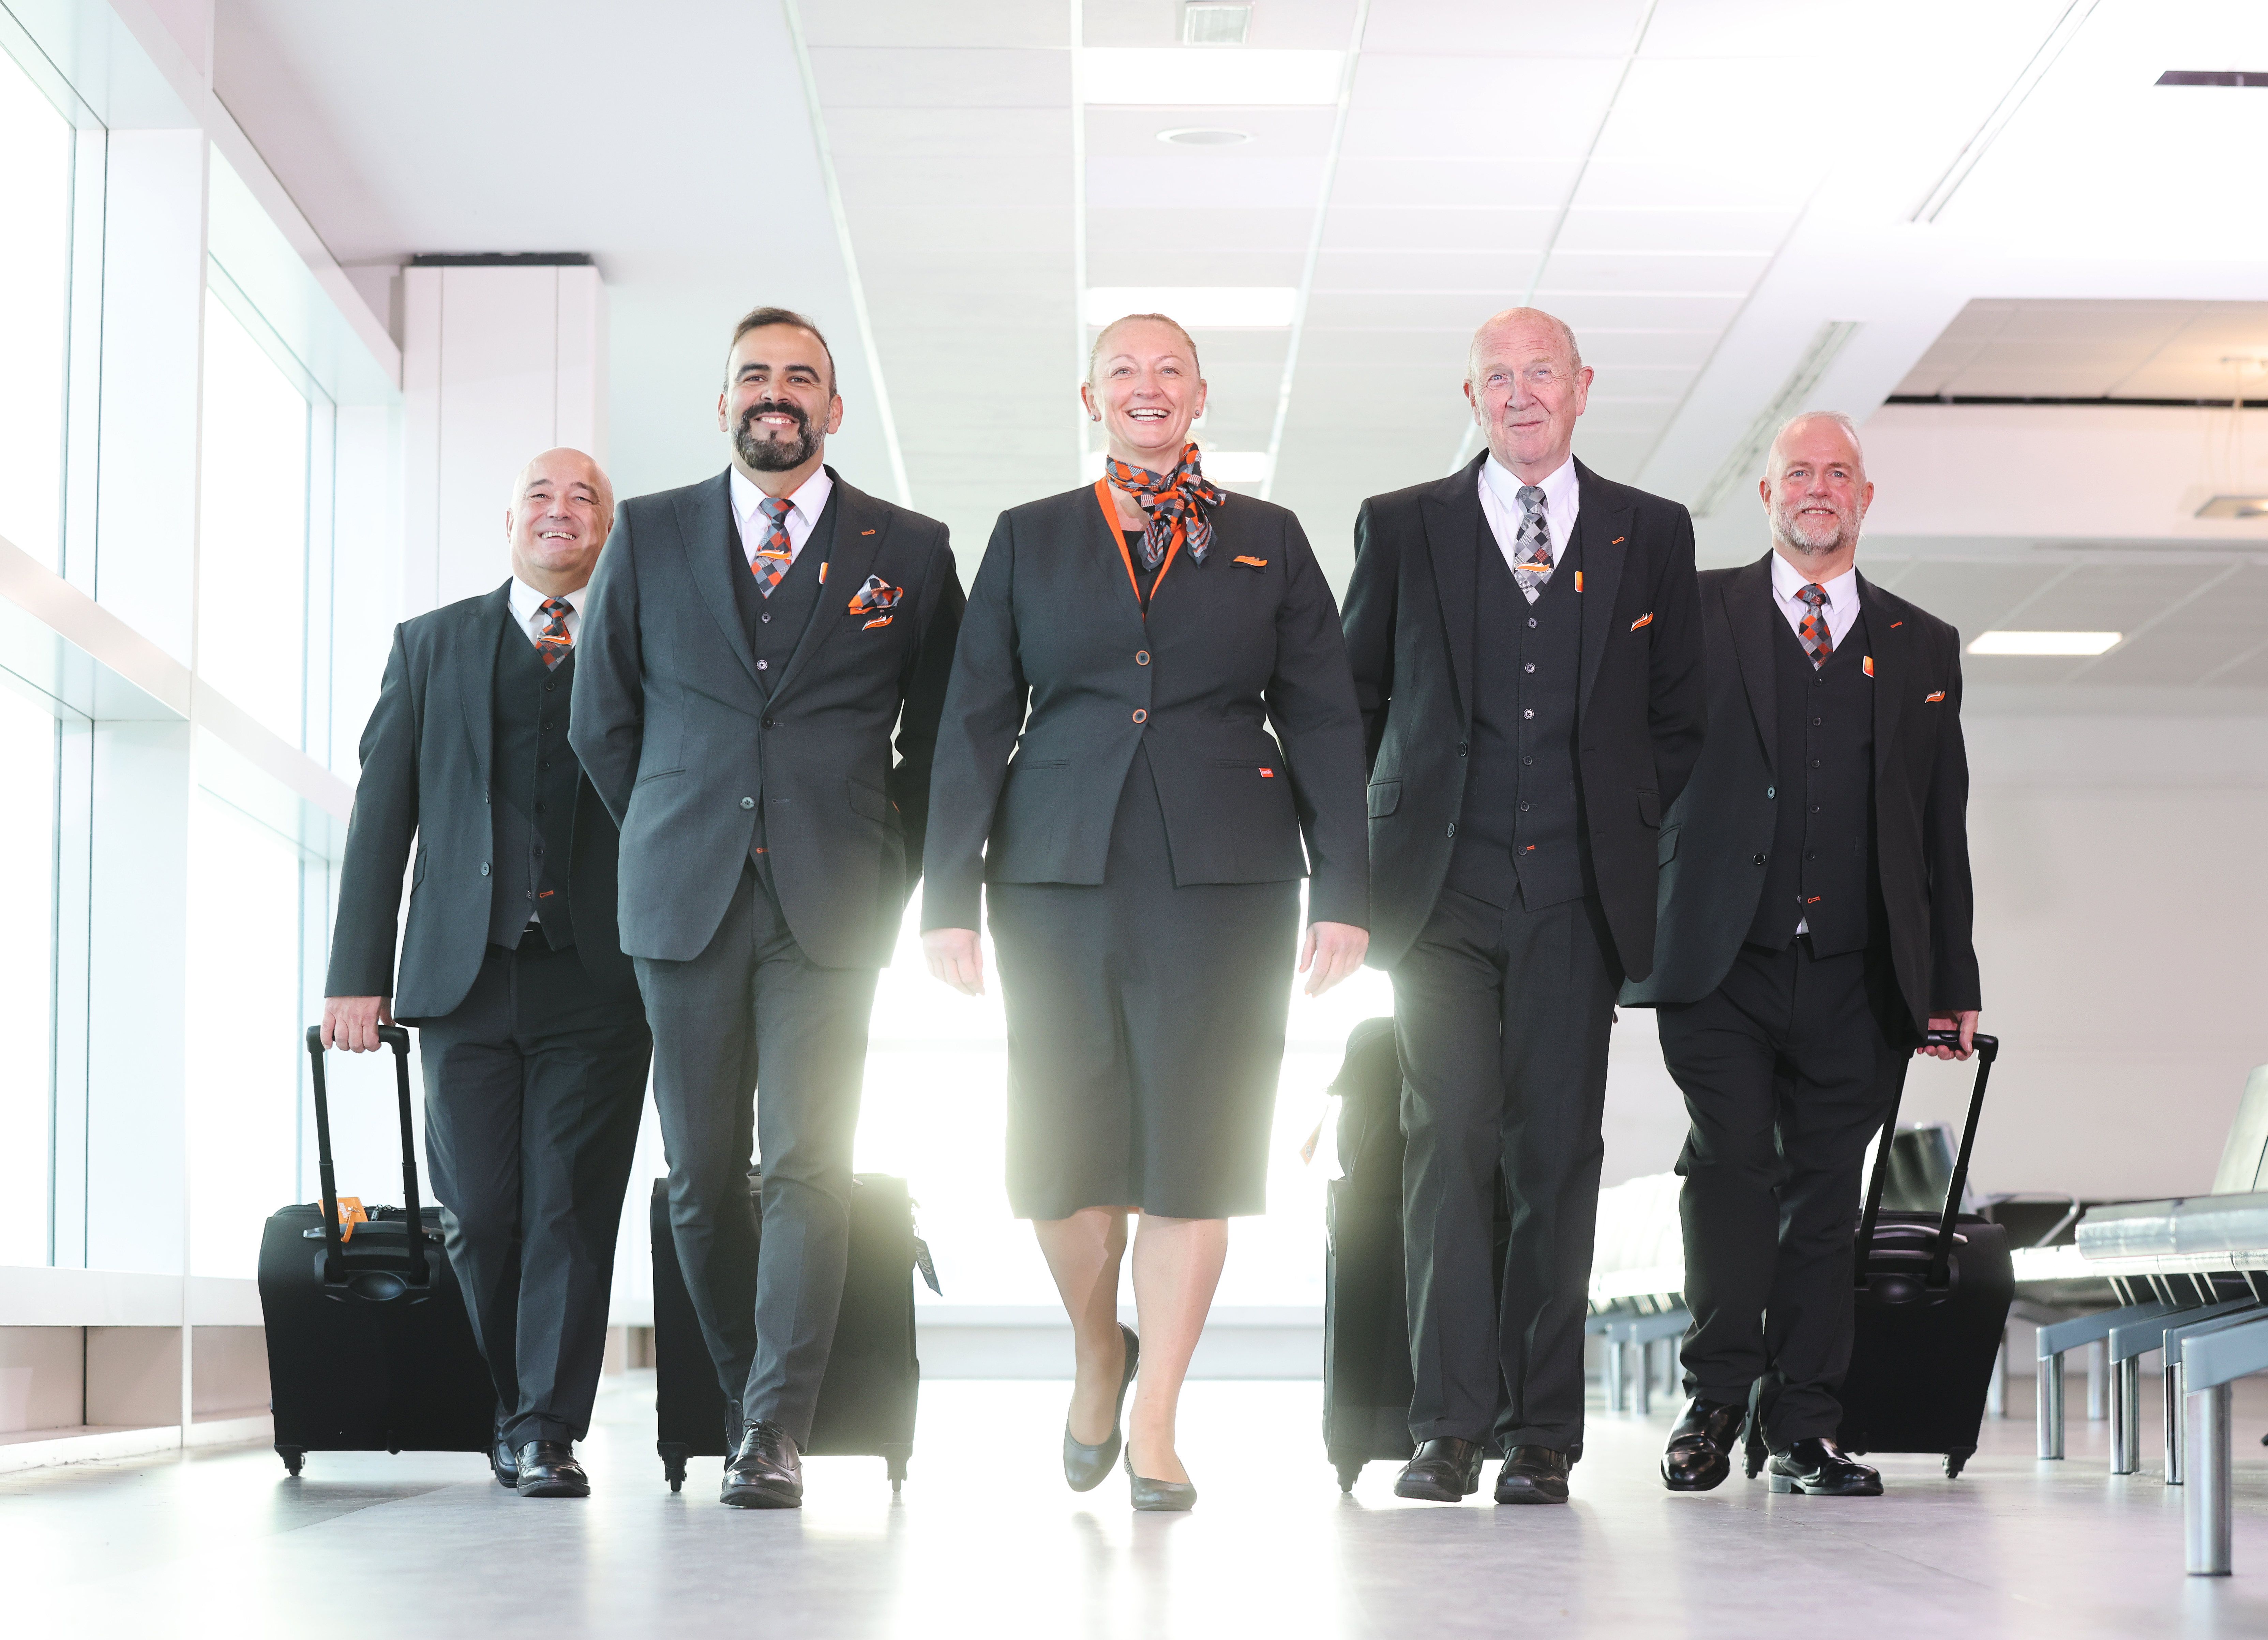 easyJet is encouraging adults over the age of 45 to join the airline